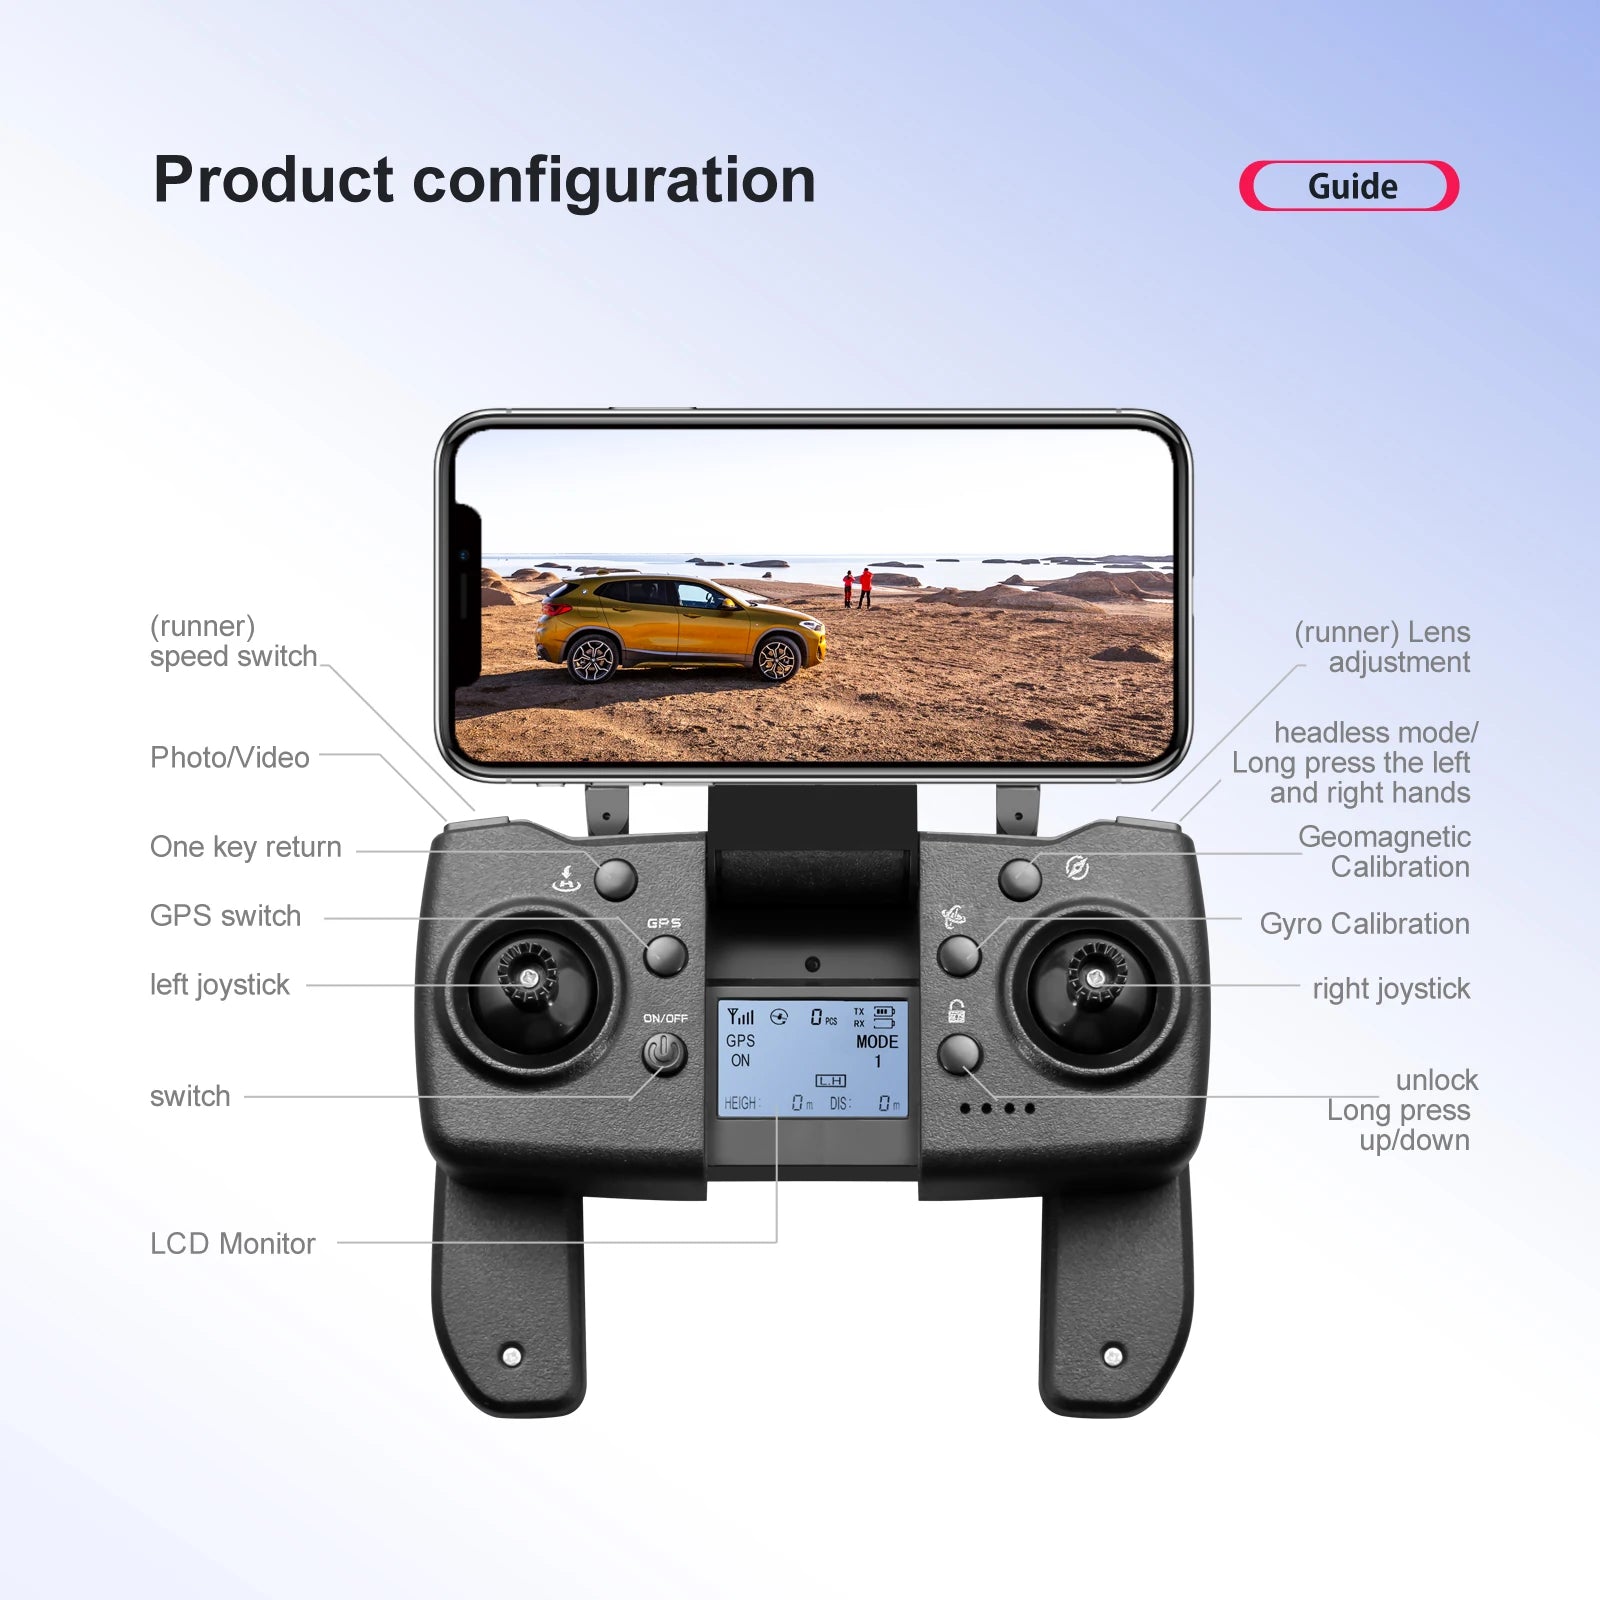 S135 Drone, Lens speed switch adjustment headless model PhotoNideo Long press the left and right hands One